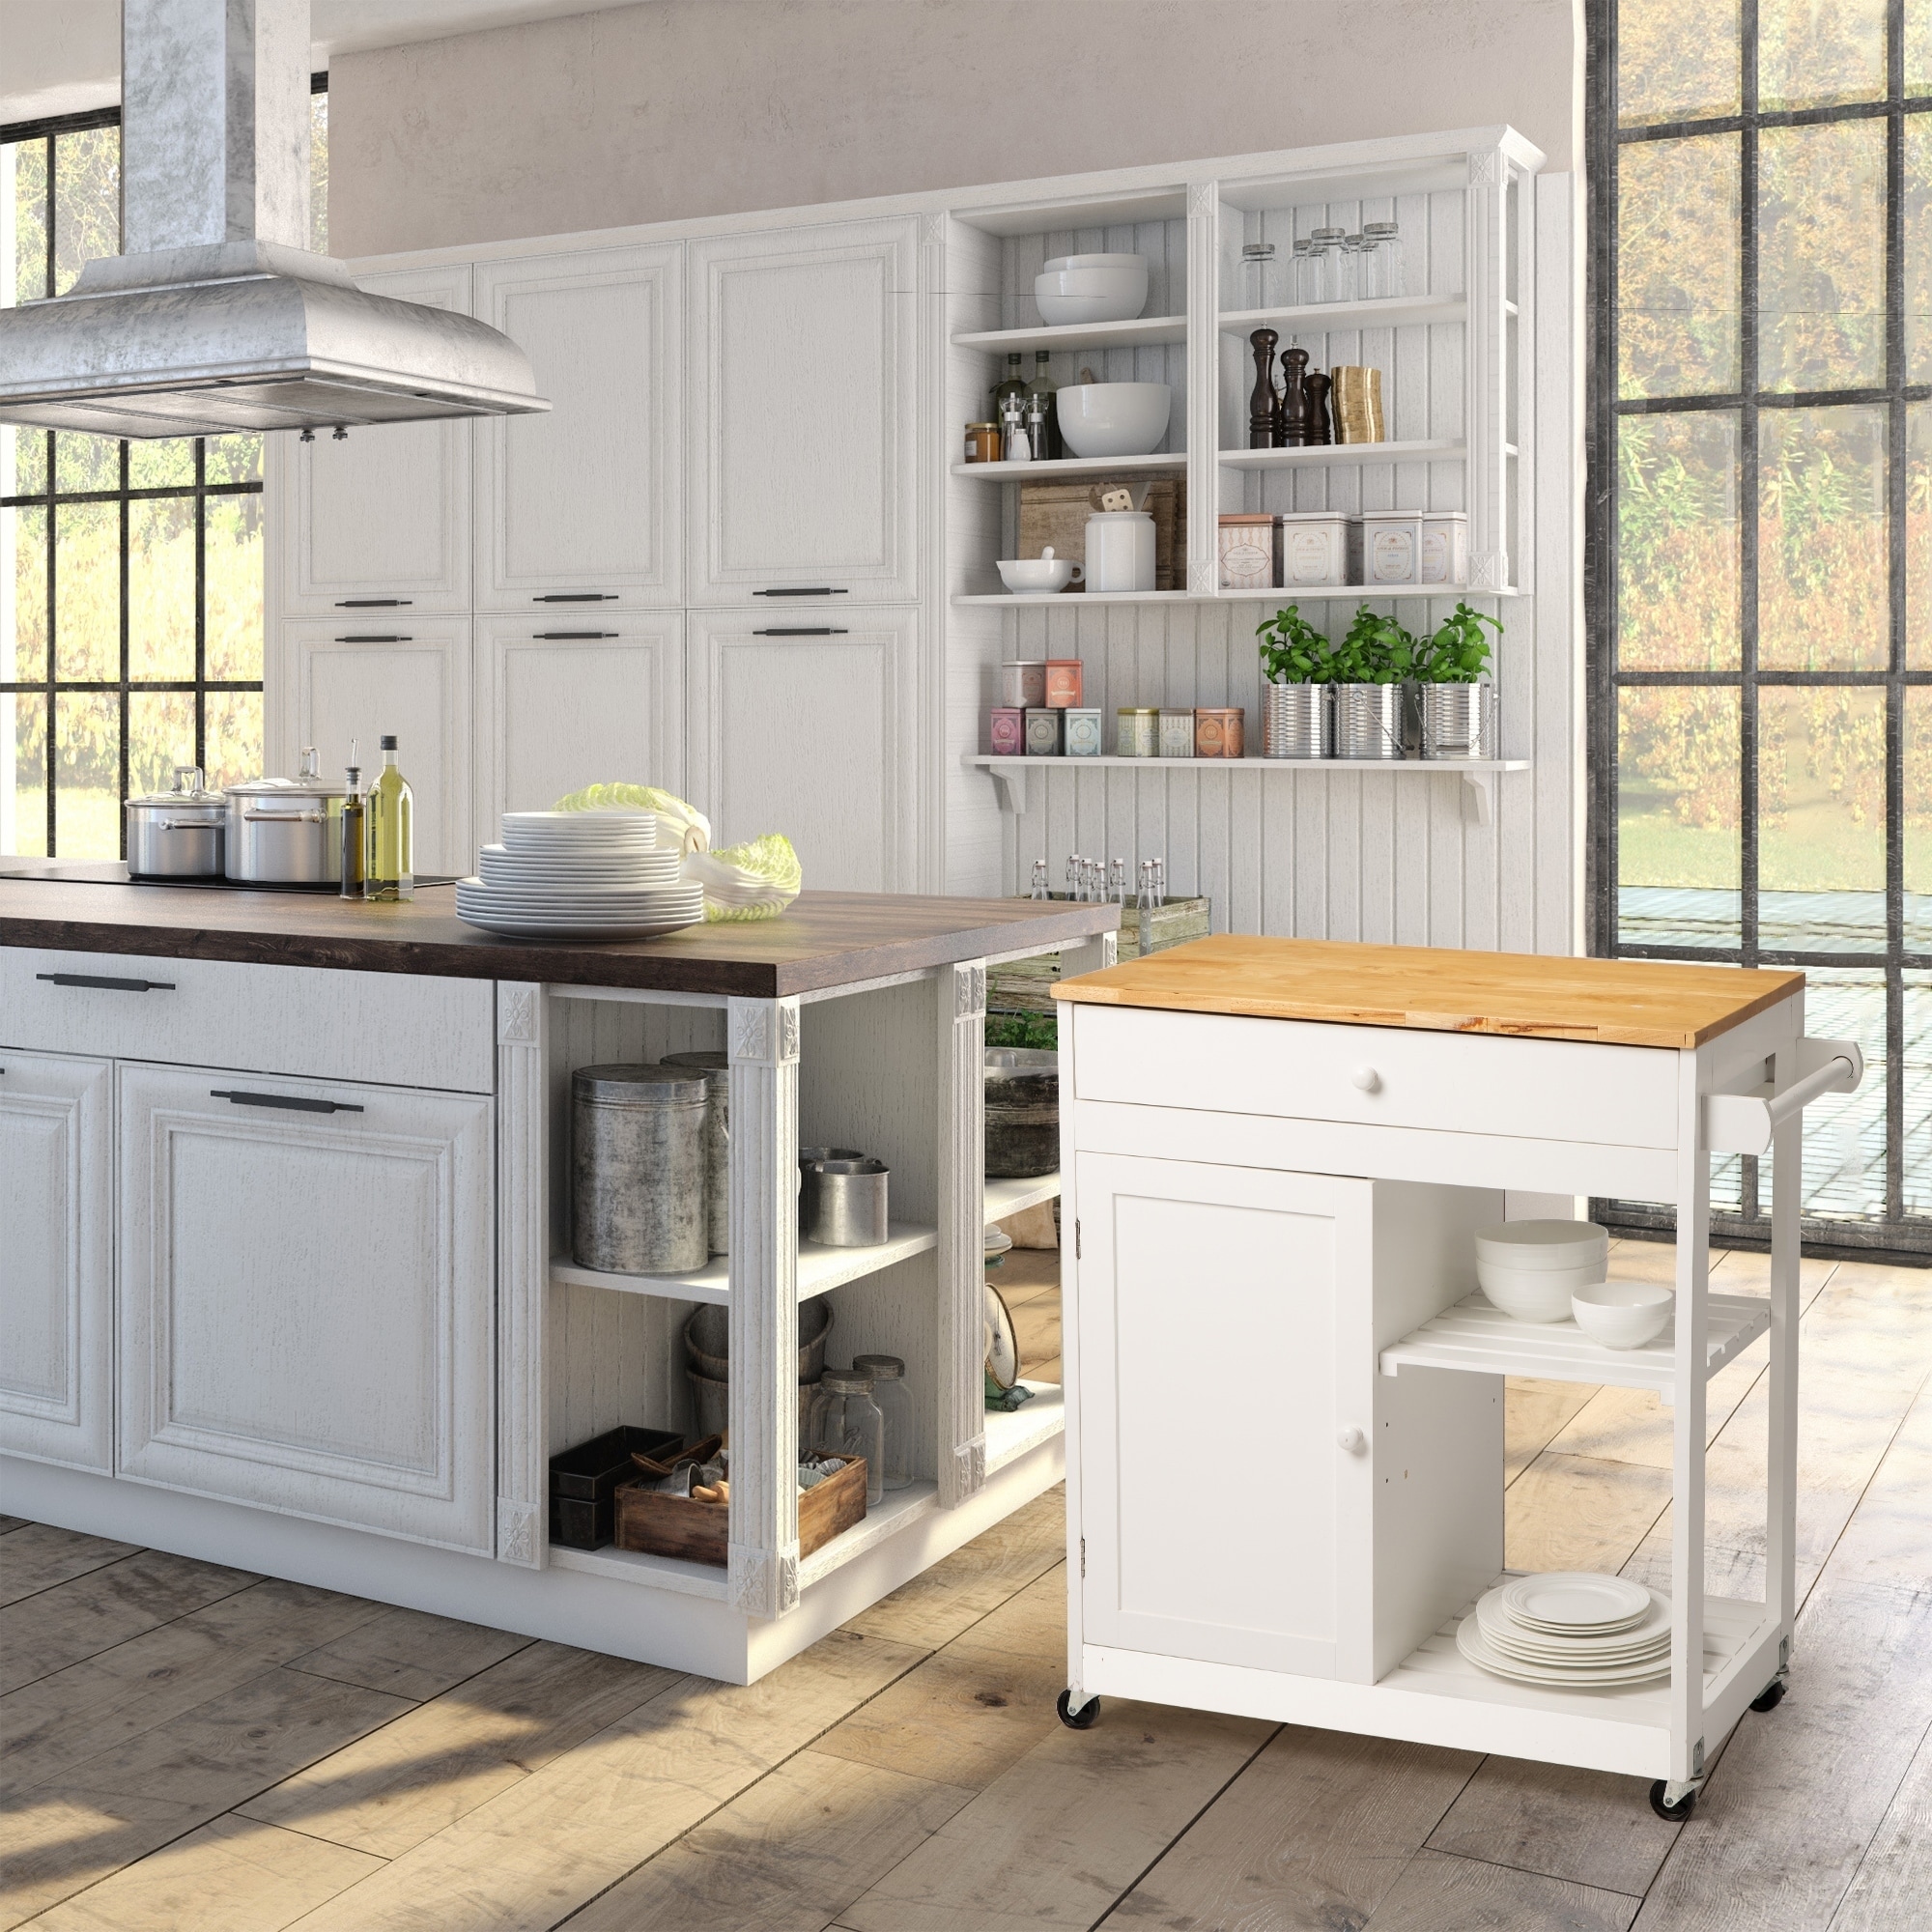 Glitzhome White Kitchen Island Kitchen Cart With Rubber Wooden Top On Sale Overstock 23468088 Style B With 1 Drawer 1 Door